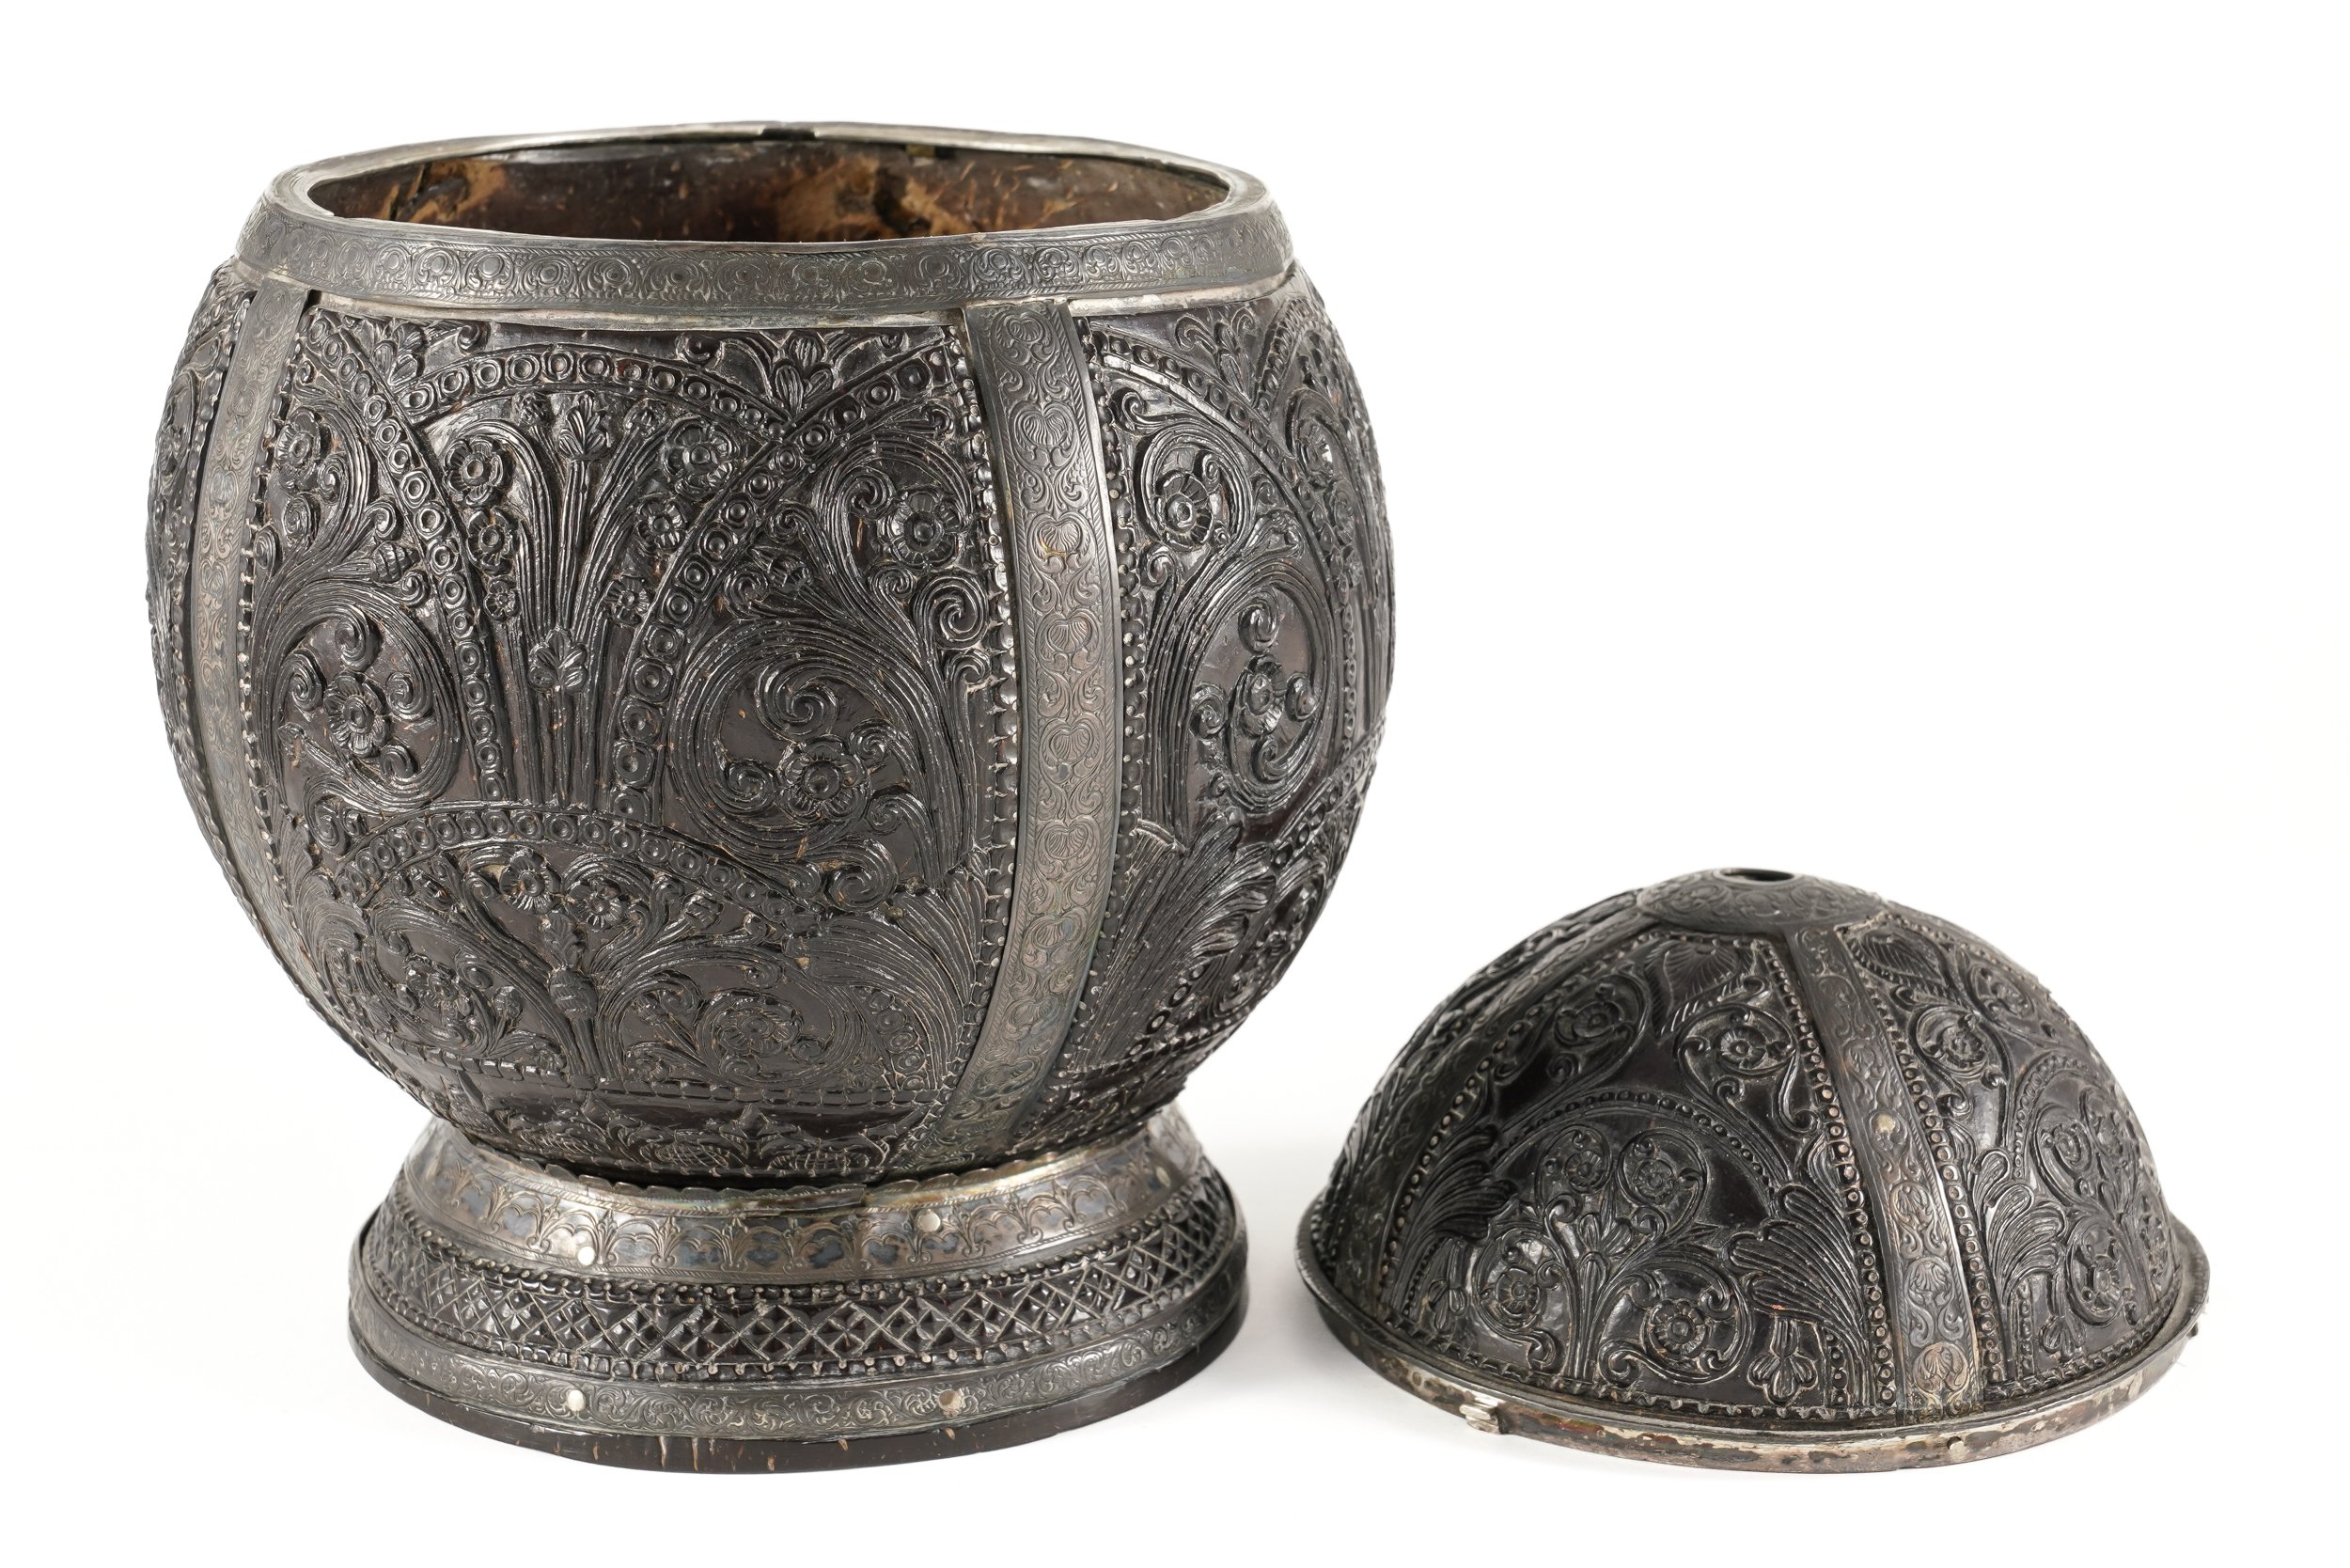 A SOUTH EAST ASIAN RELIEF CARVED AND SILVER METAL MOUNTED COCONUT CUP AND COVER - Image 6 of 14